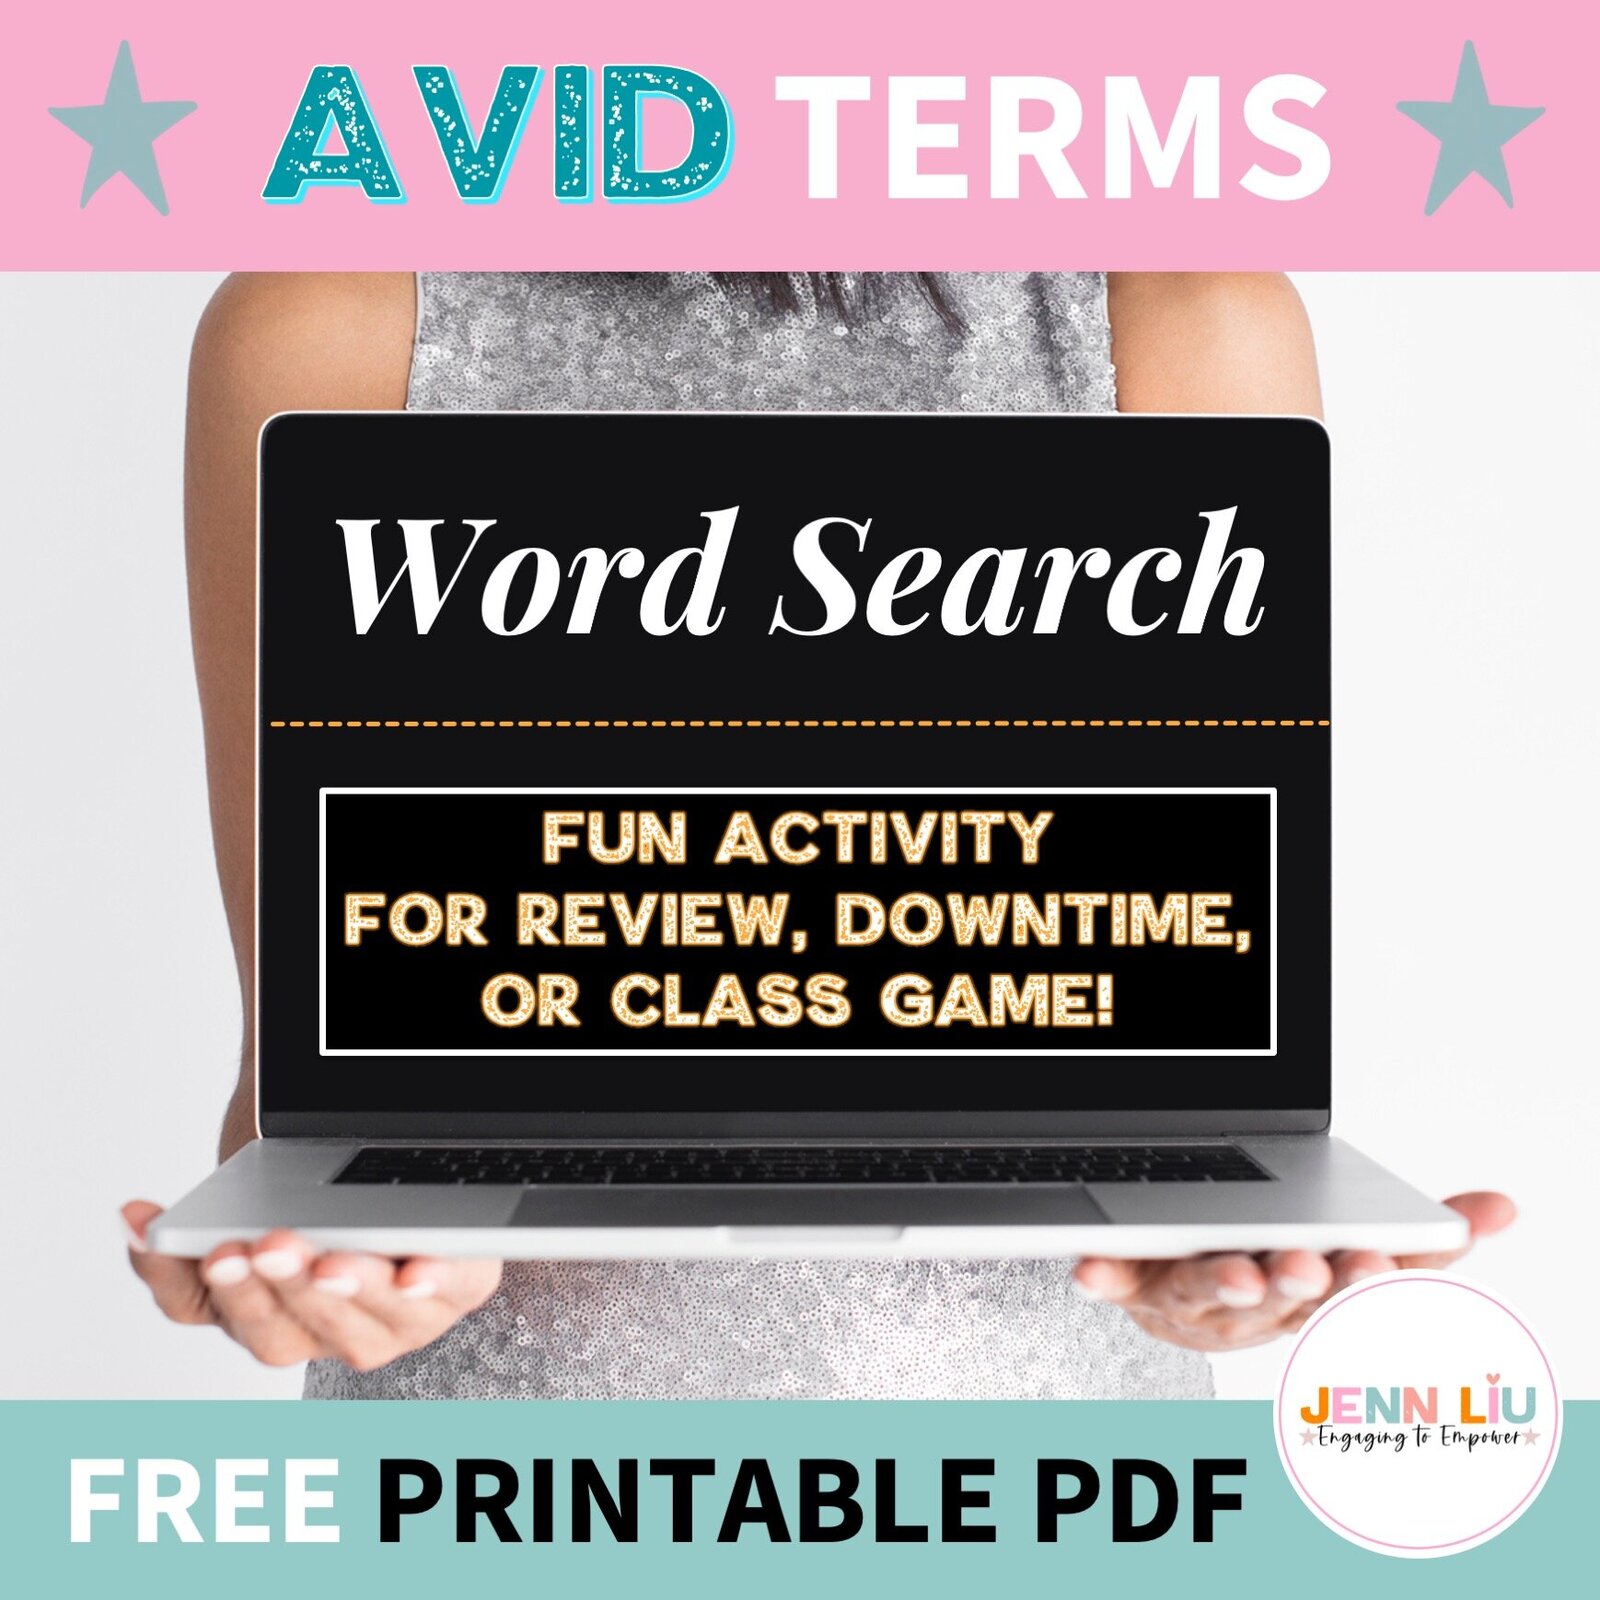 avid-terms-word-search